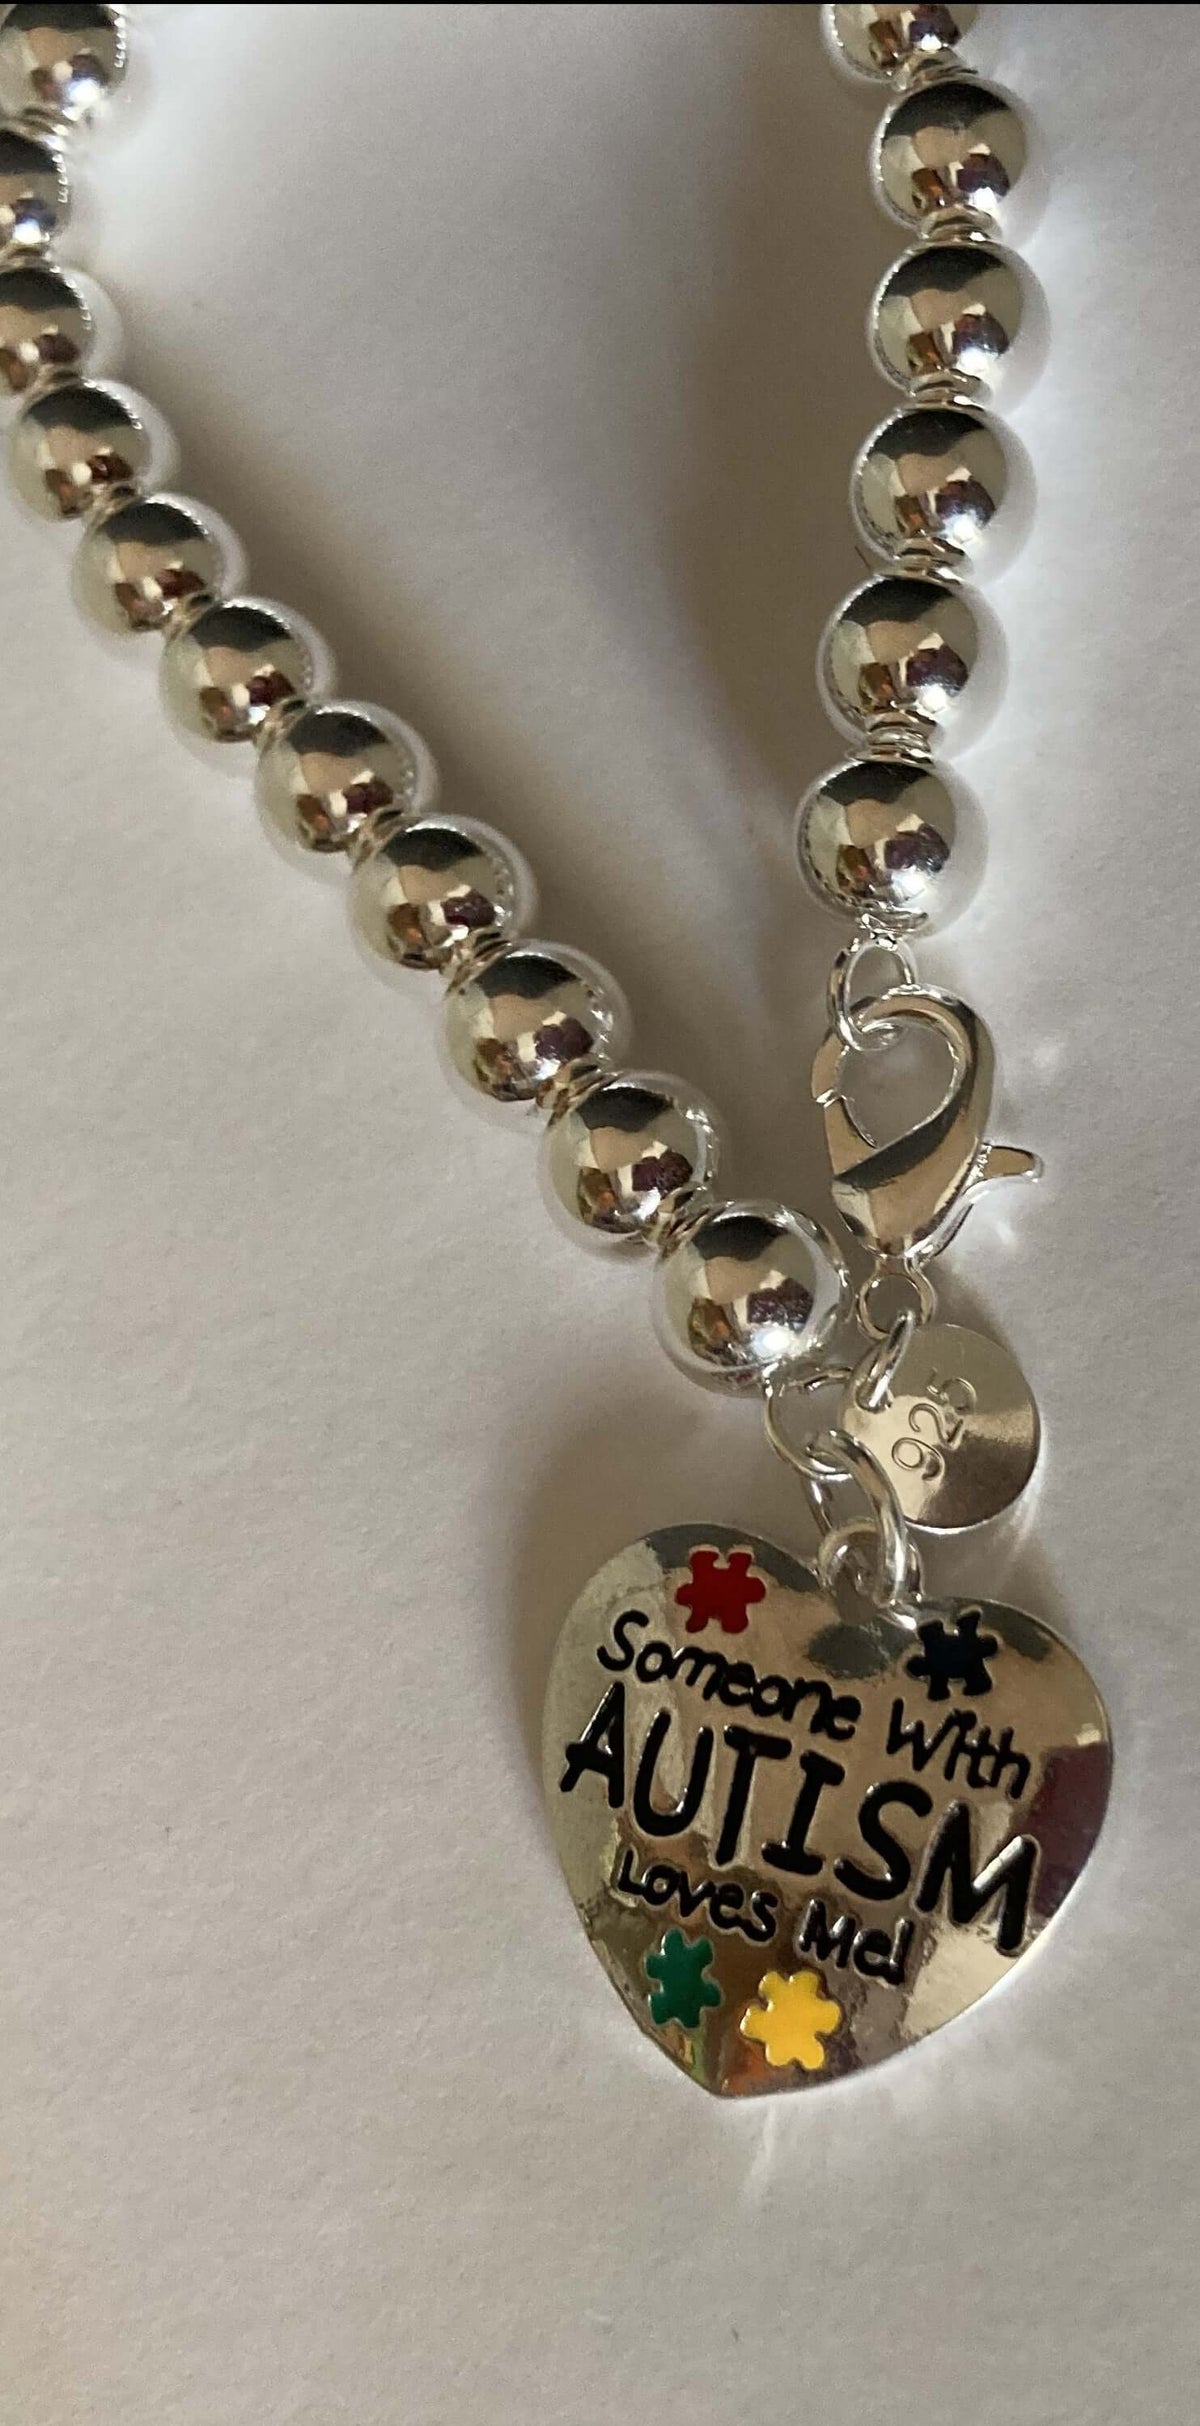 Someone with Autism Loves Me Beaded Charm Bracelet - The House of Awareness